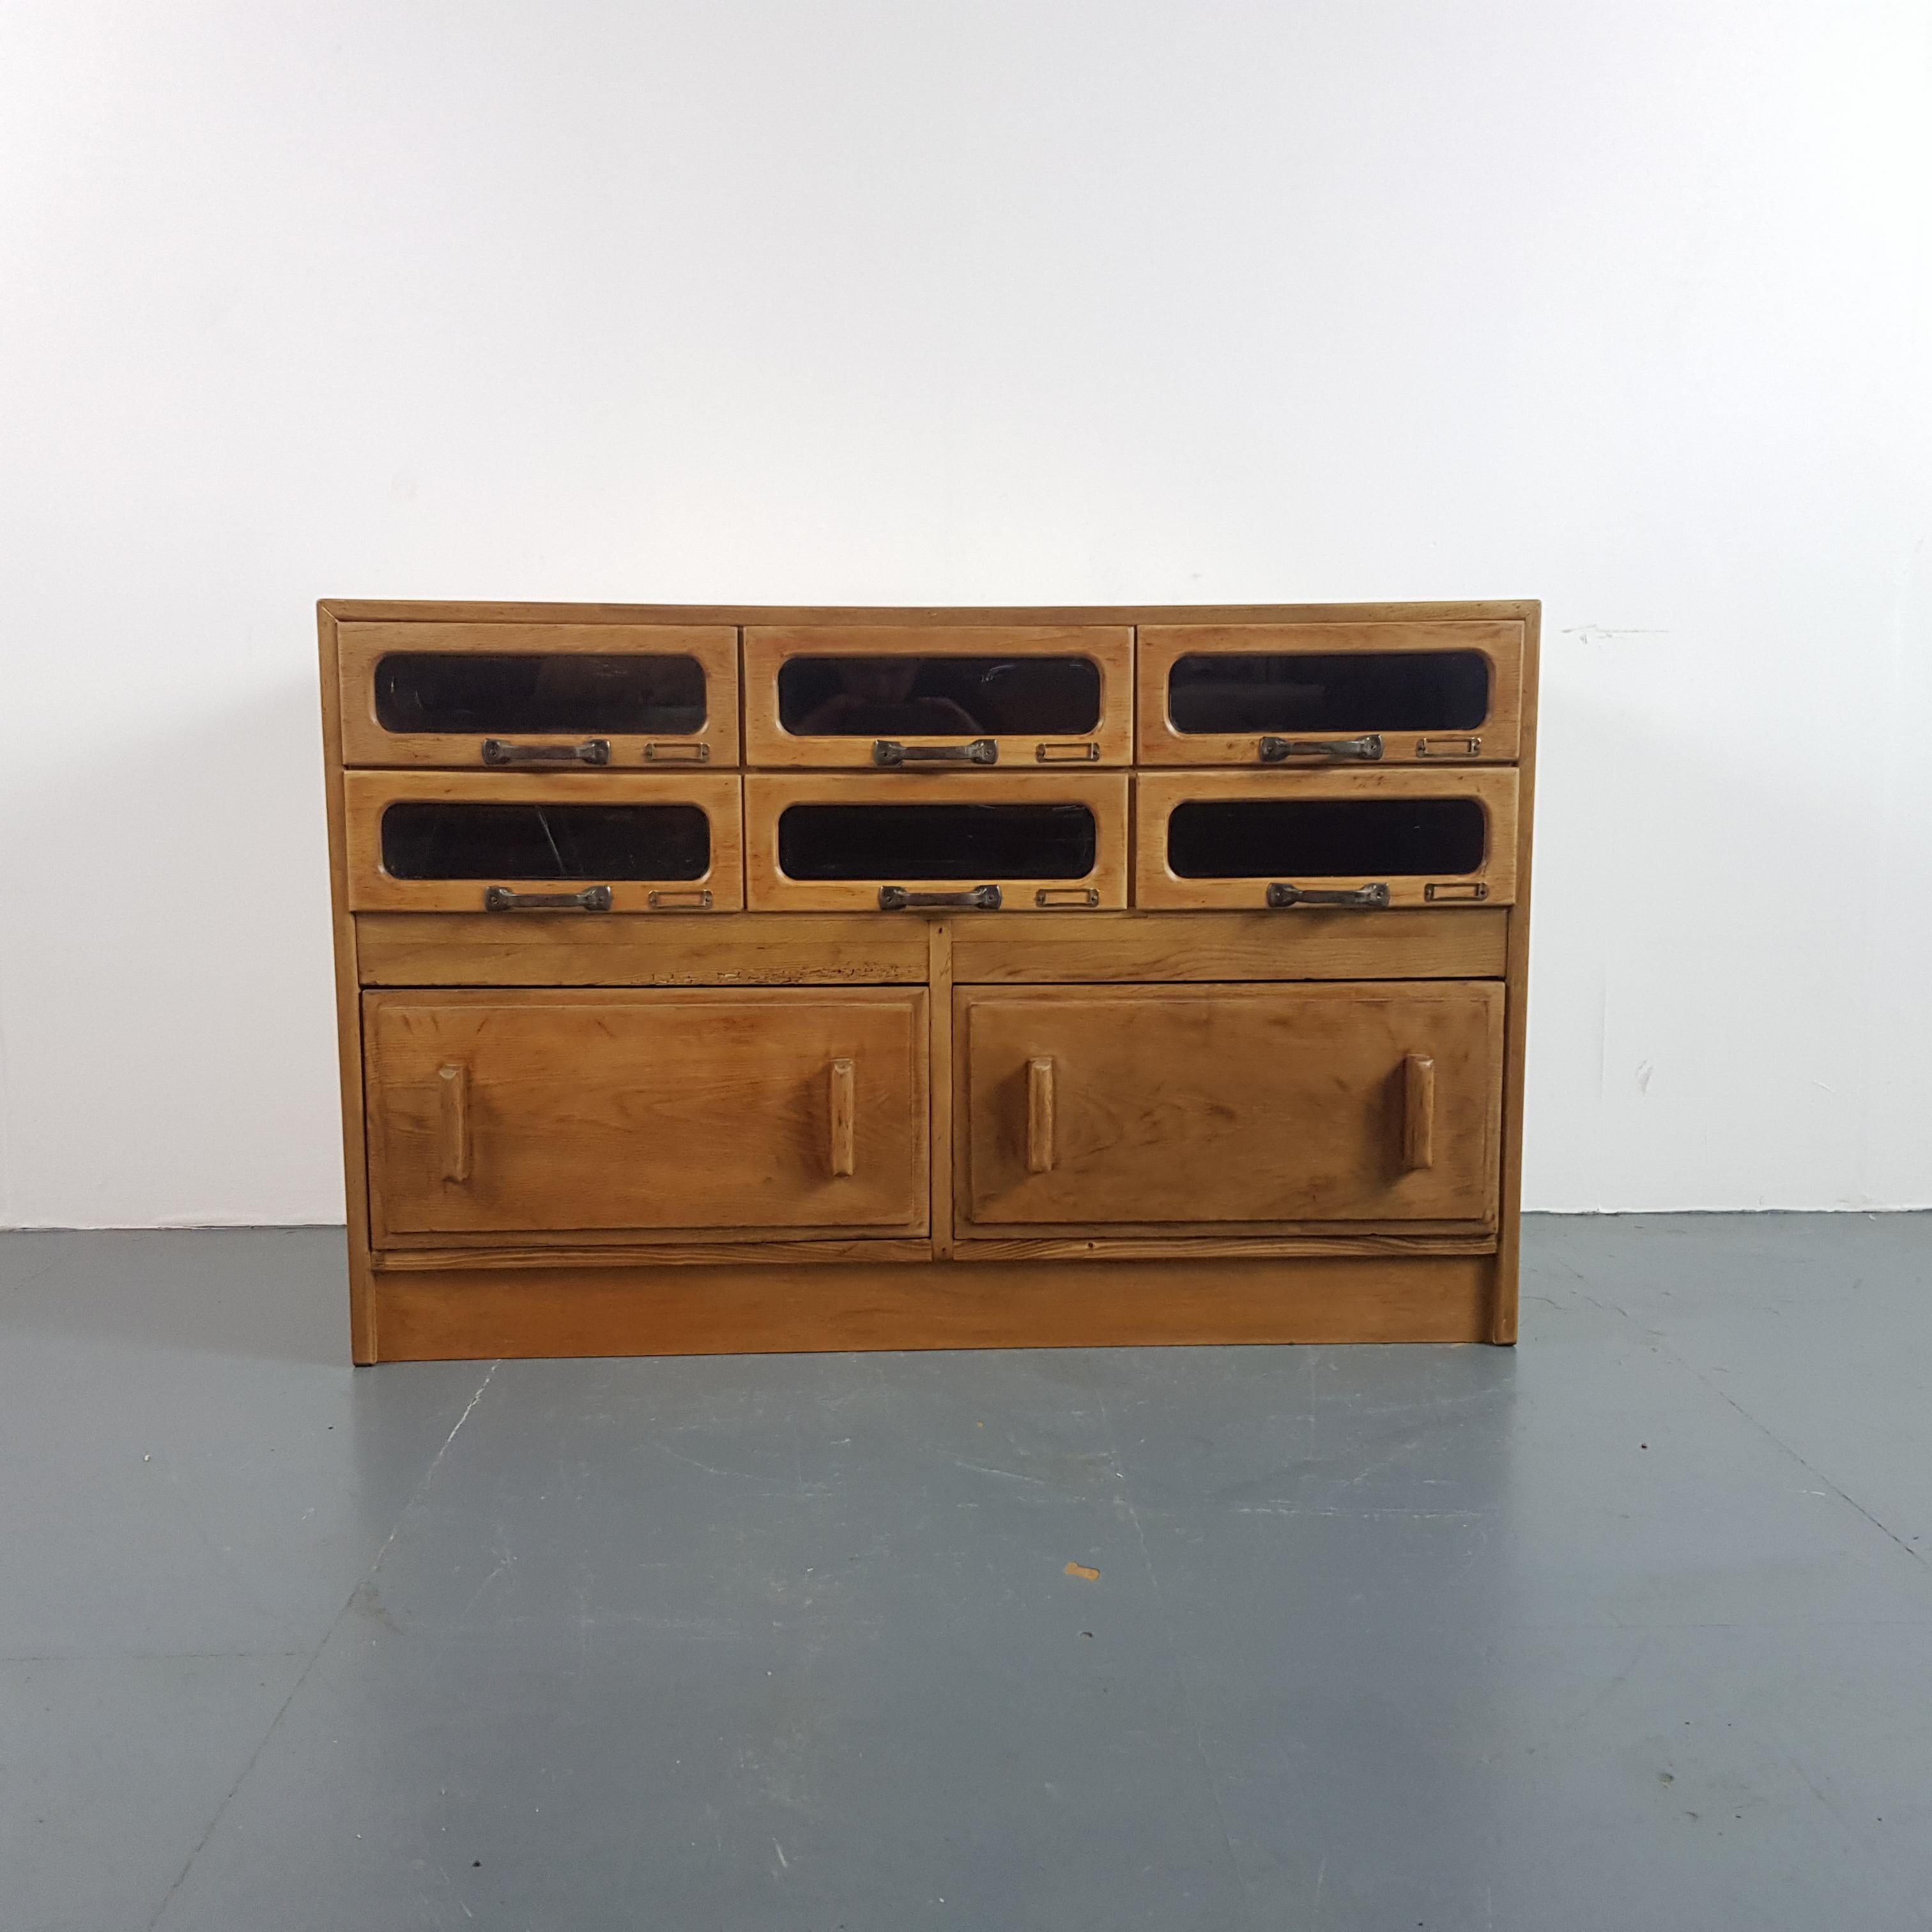 Lovely 8 drawer haberdashery shop cabinet from the first half of the last century. 

It has 6 glass fronted drawers, all with original metal D handles.

Approximate dimensions:

Width: 119cm

Height: 76cm

Depth: 52cm

Drawers: 36cm W x